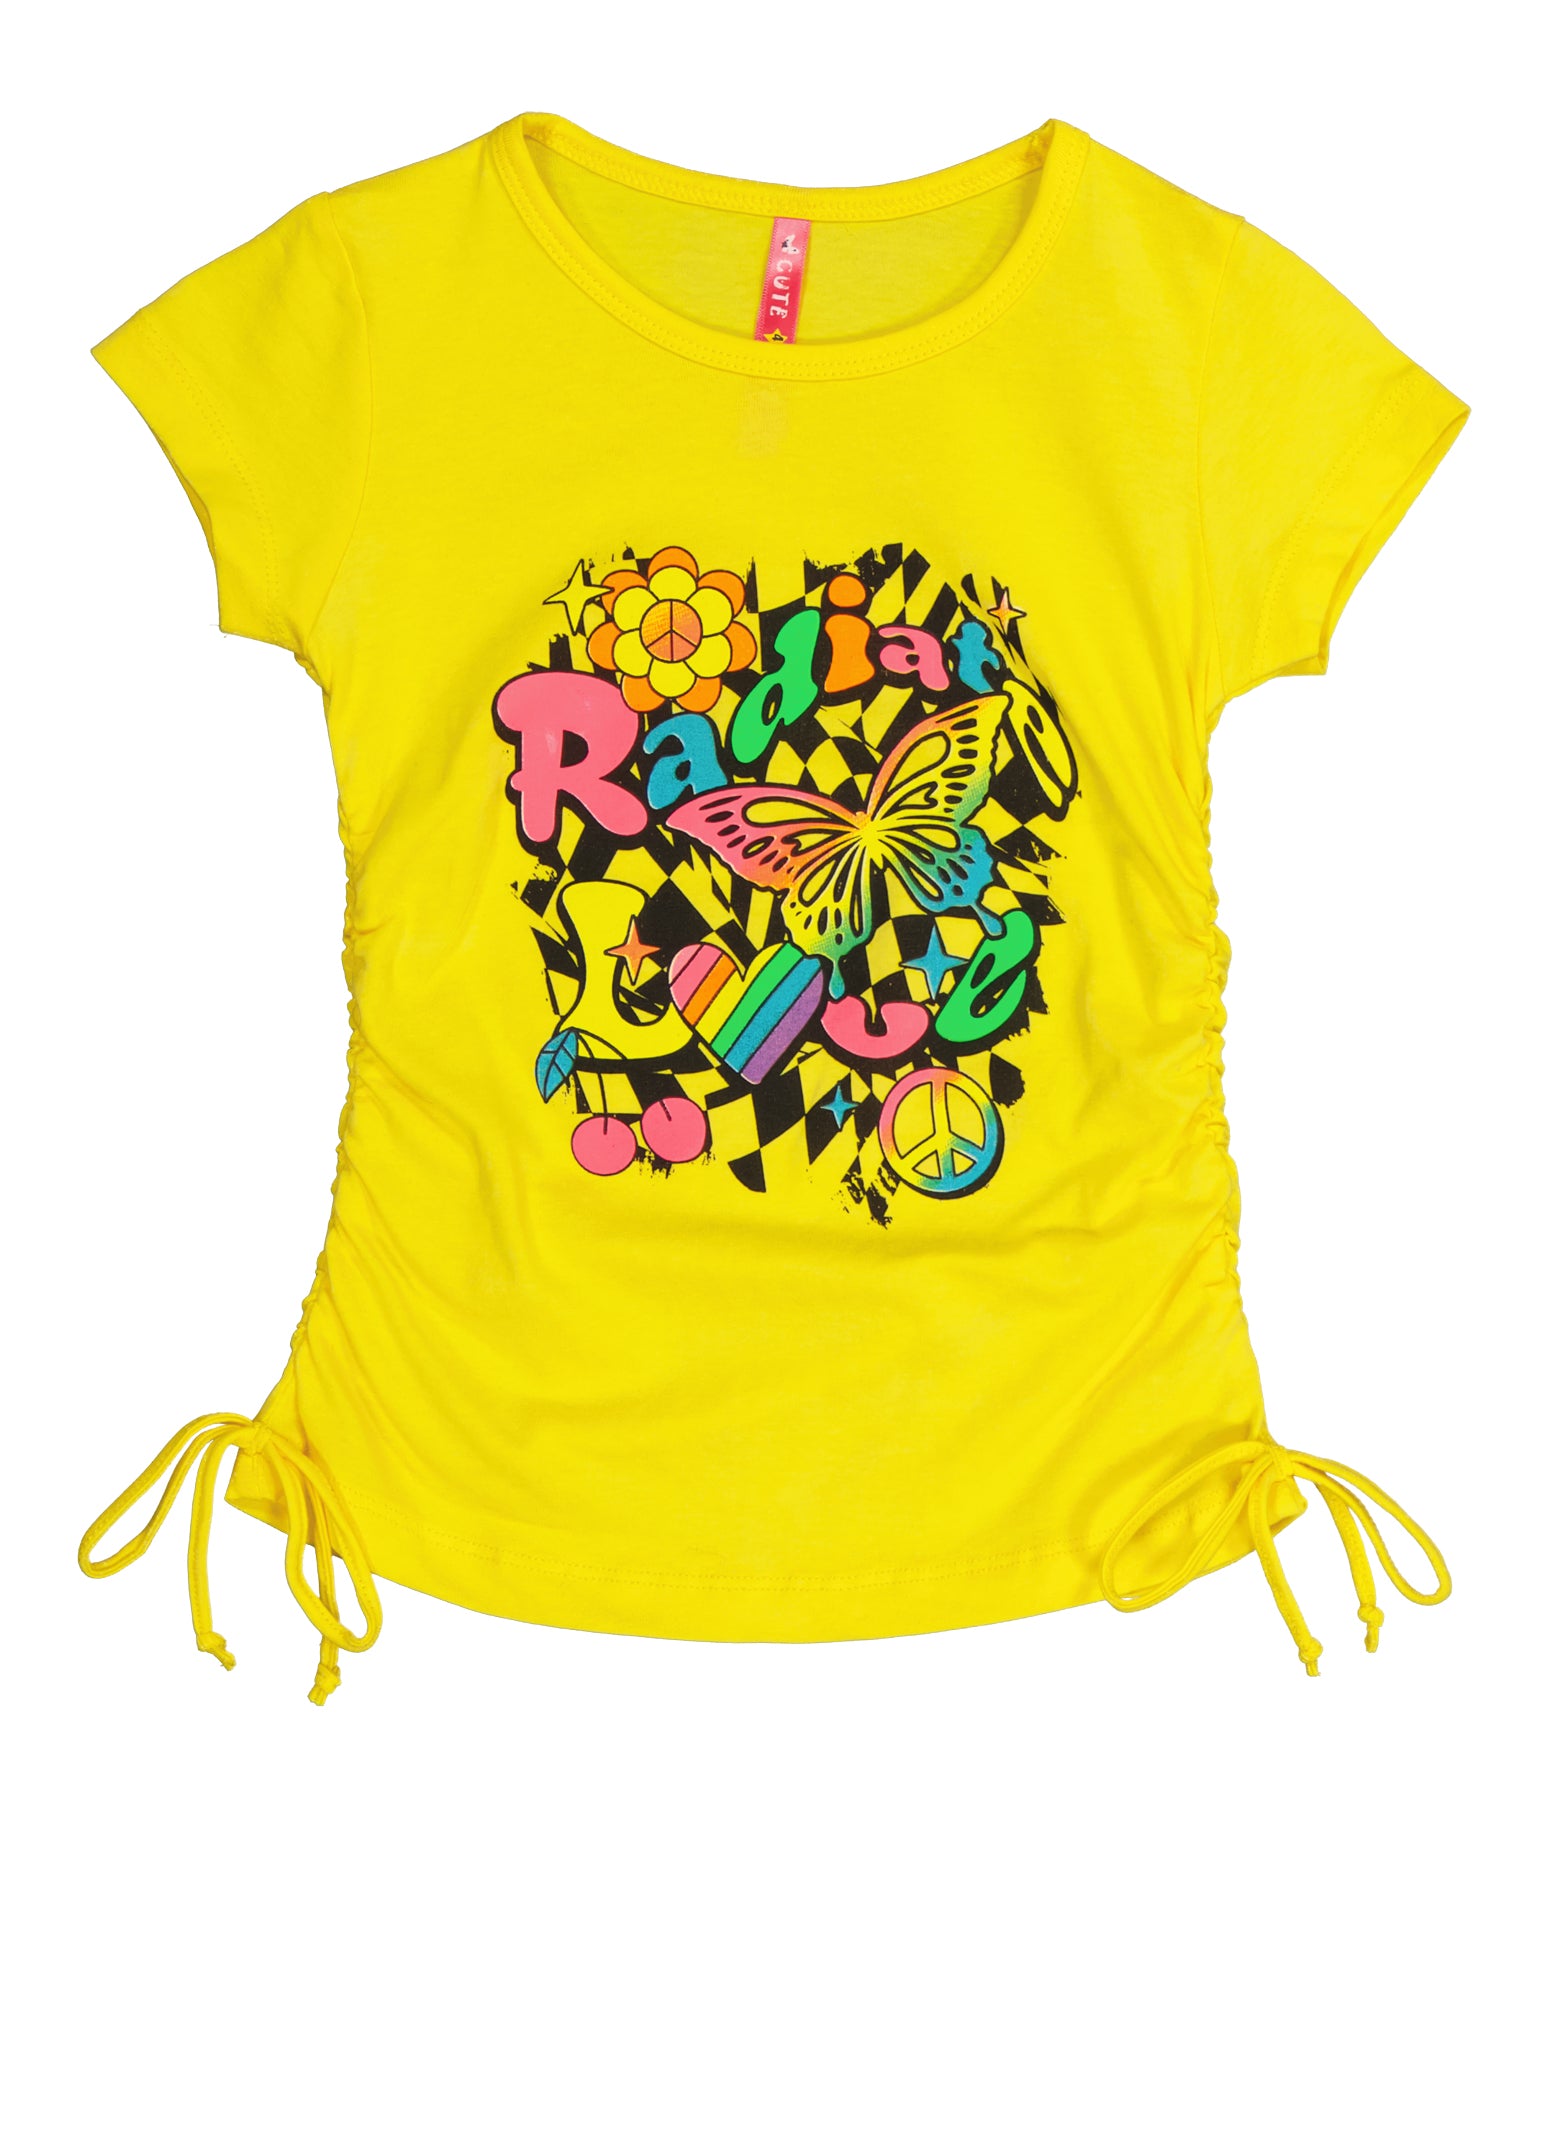 Little Girls Radiate Love Ruched Graphic Tee, Yellow, Size 5-6